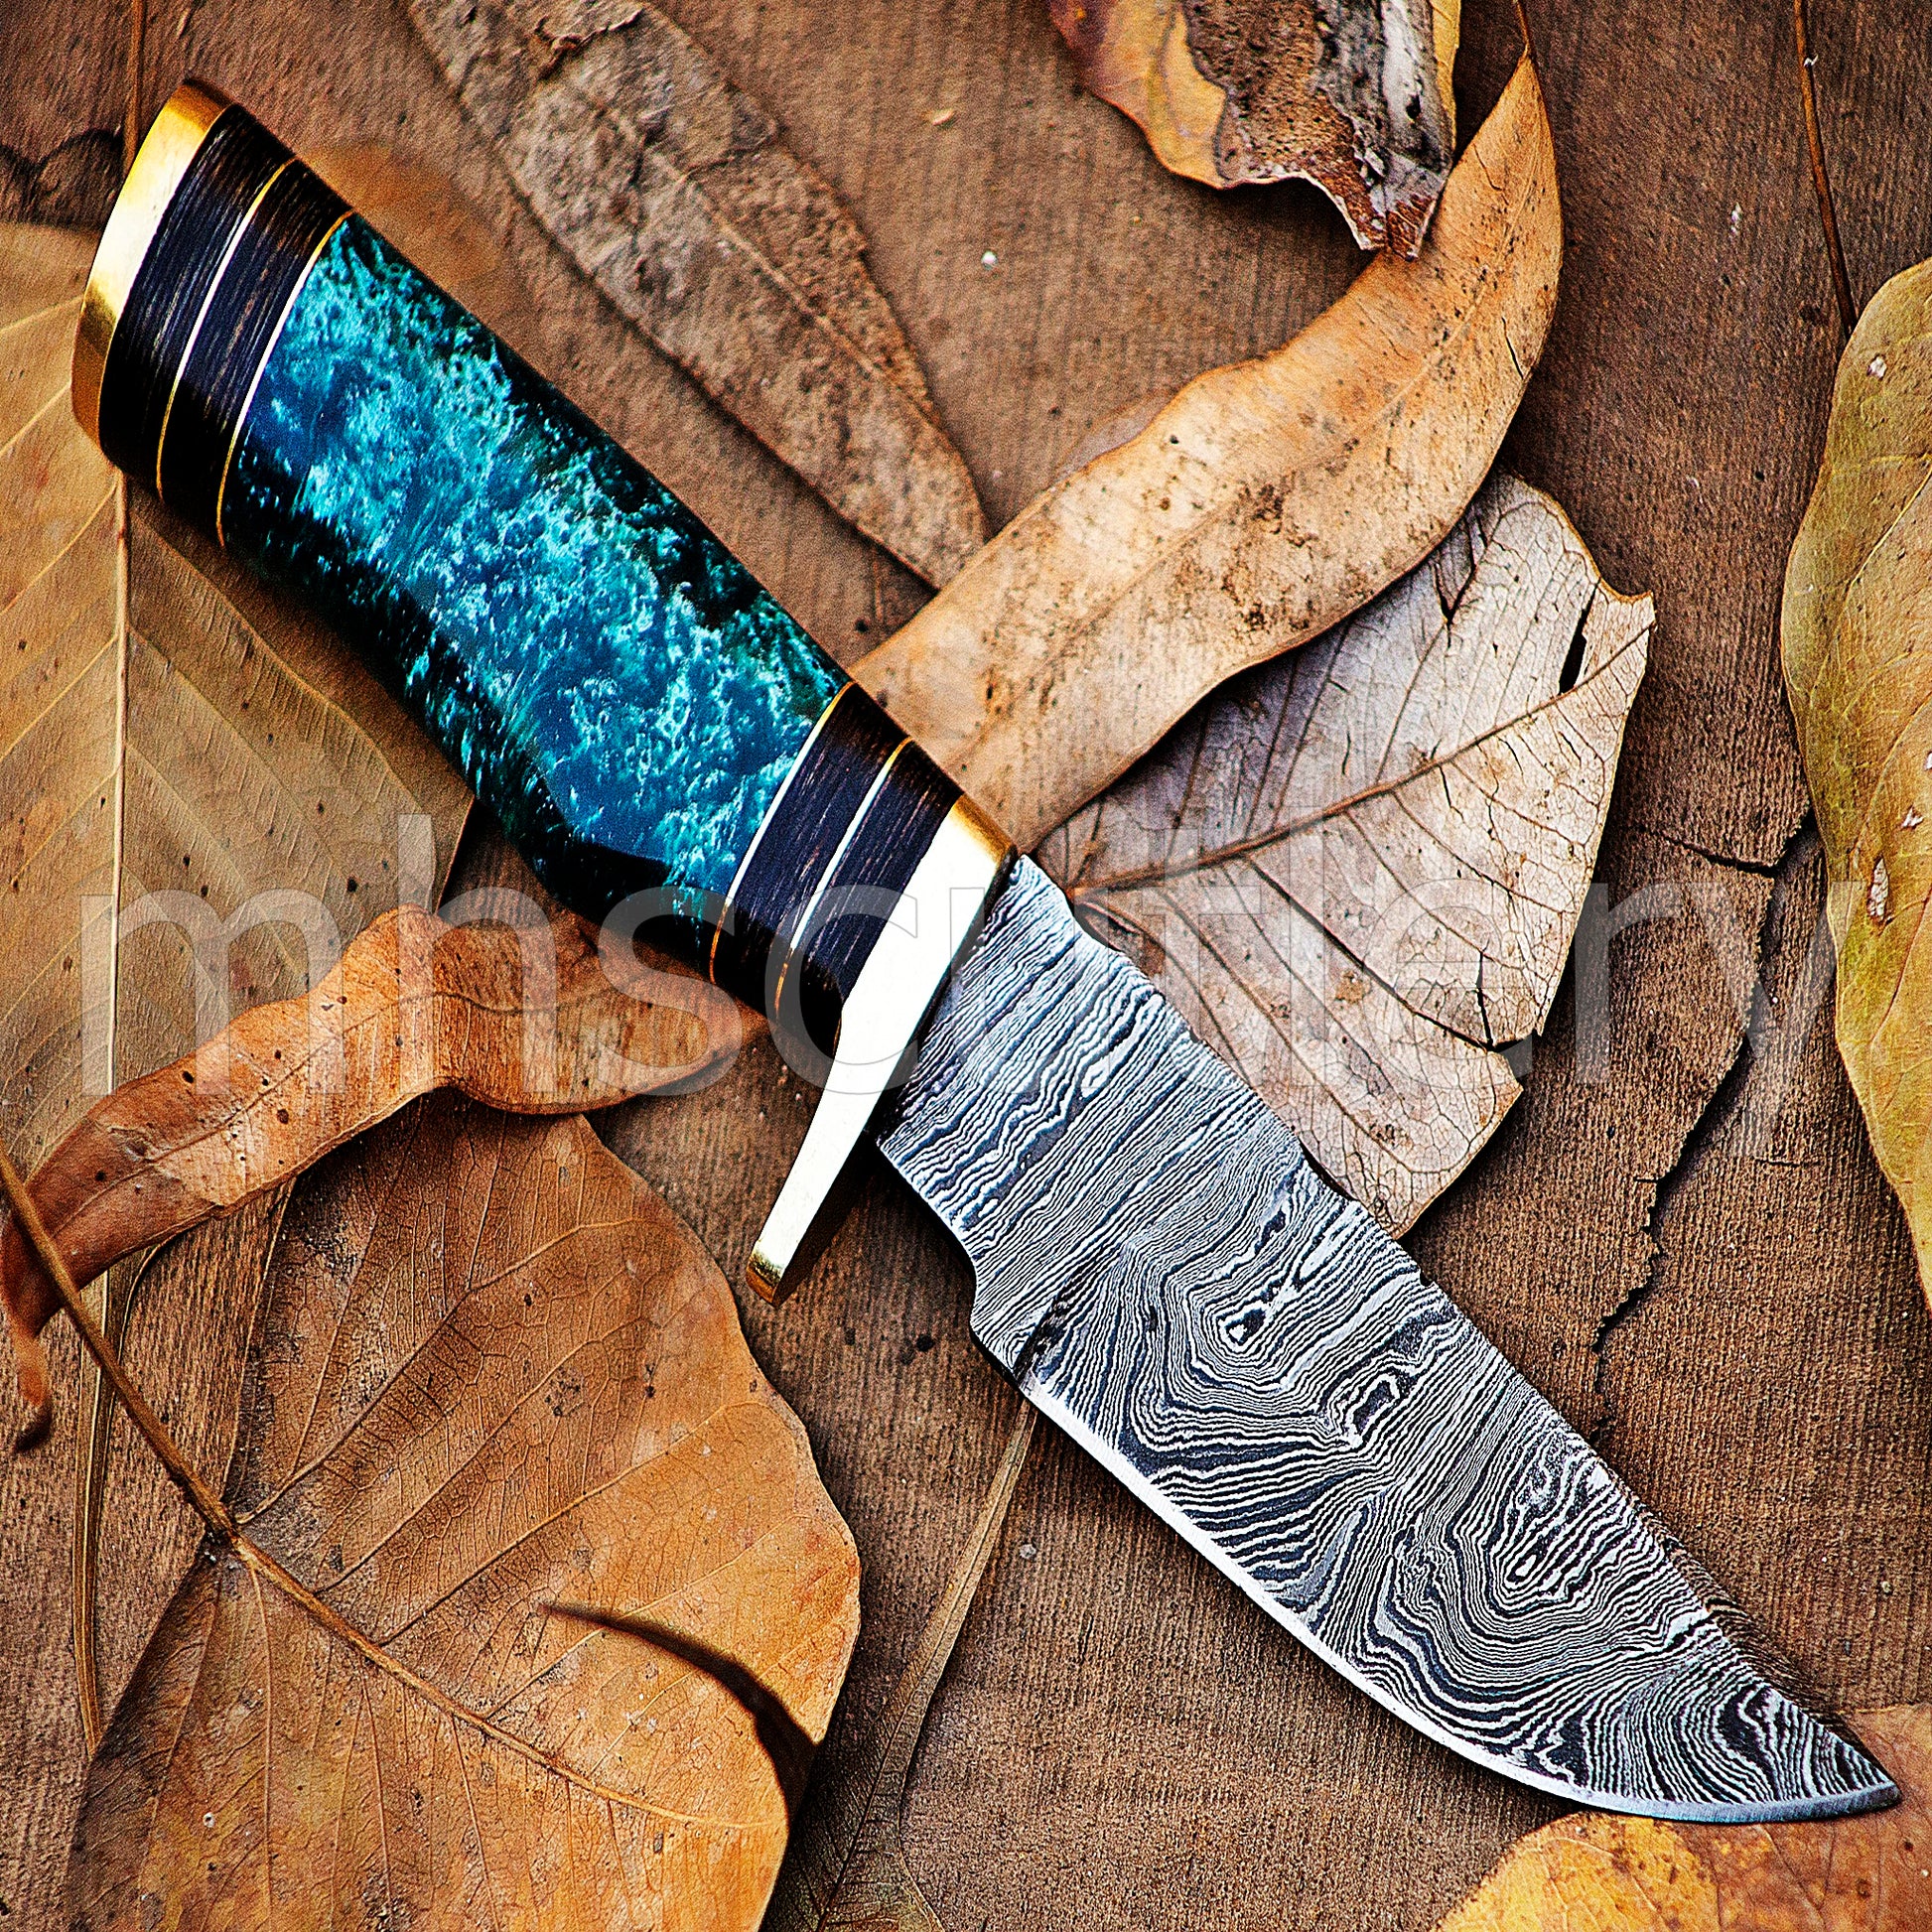 Damascus Steel Skinning Knife Rat-Tail With Resin Handle | mhscutlery